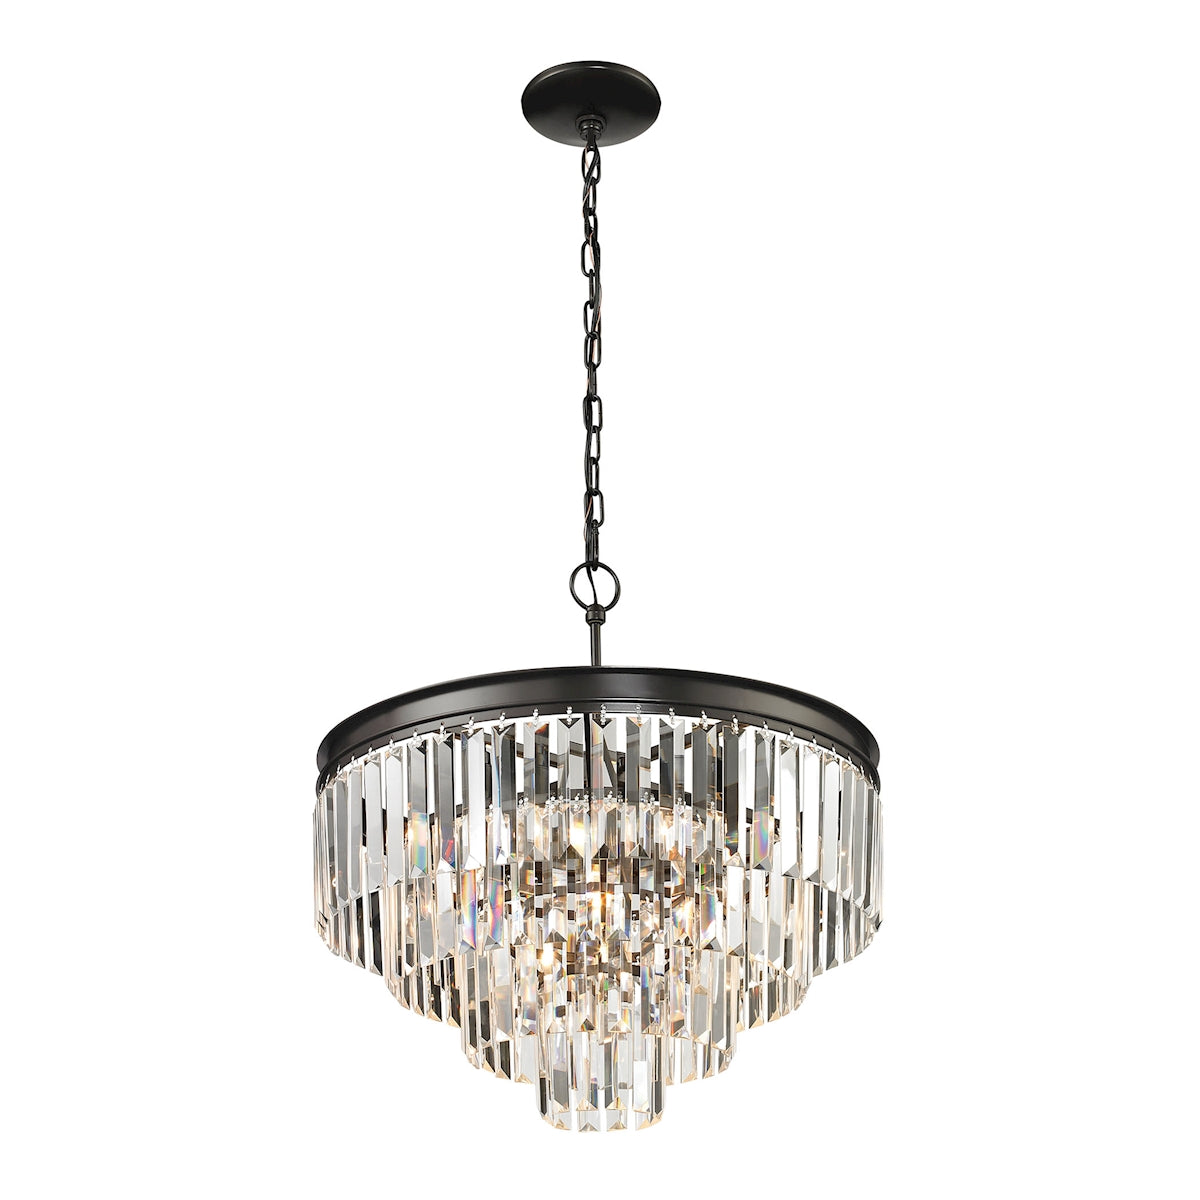 ELK Lighting 14213/4+1 Palacial 4+1-Light Chandelier in Oil Rubbed Bronze with Clear Crystal